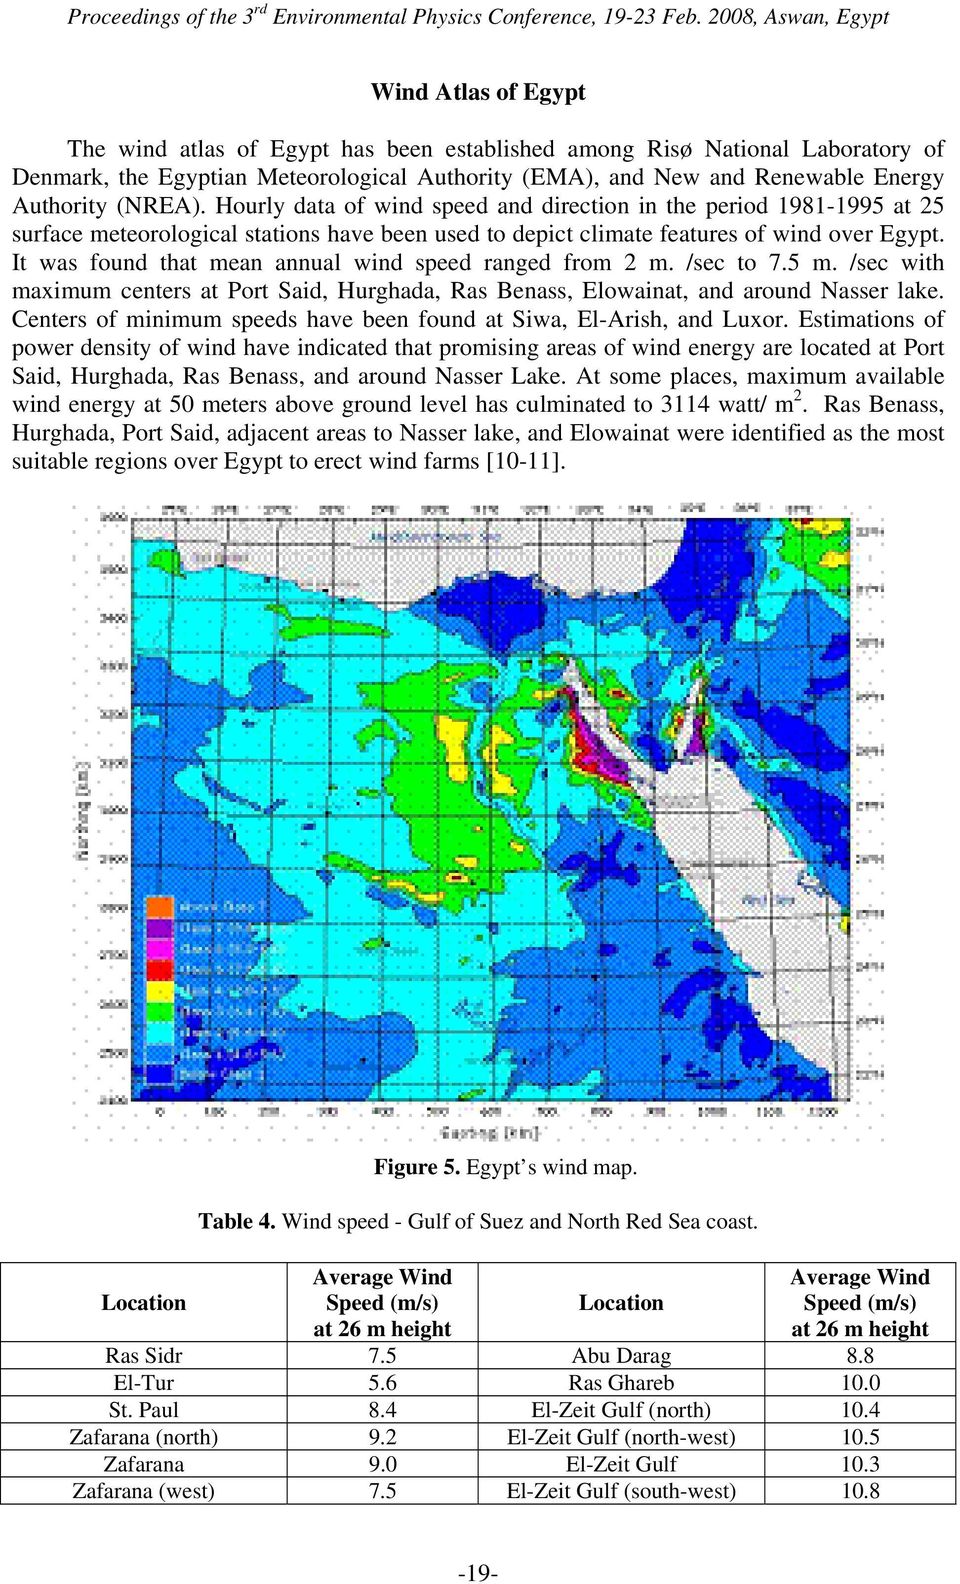 It was found that mean annual wind speed ranged from 2 m. /sec to 7.5 m. /sec with maximum centers at Port Said, Hurghada, Ras Benass, Elowainat, and around Nasser lake.